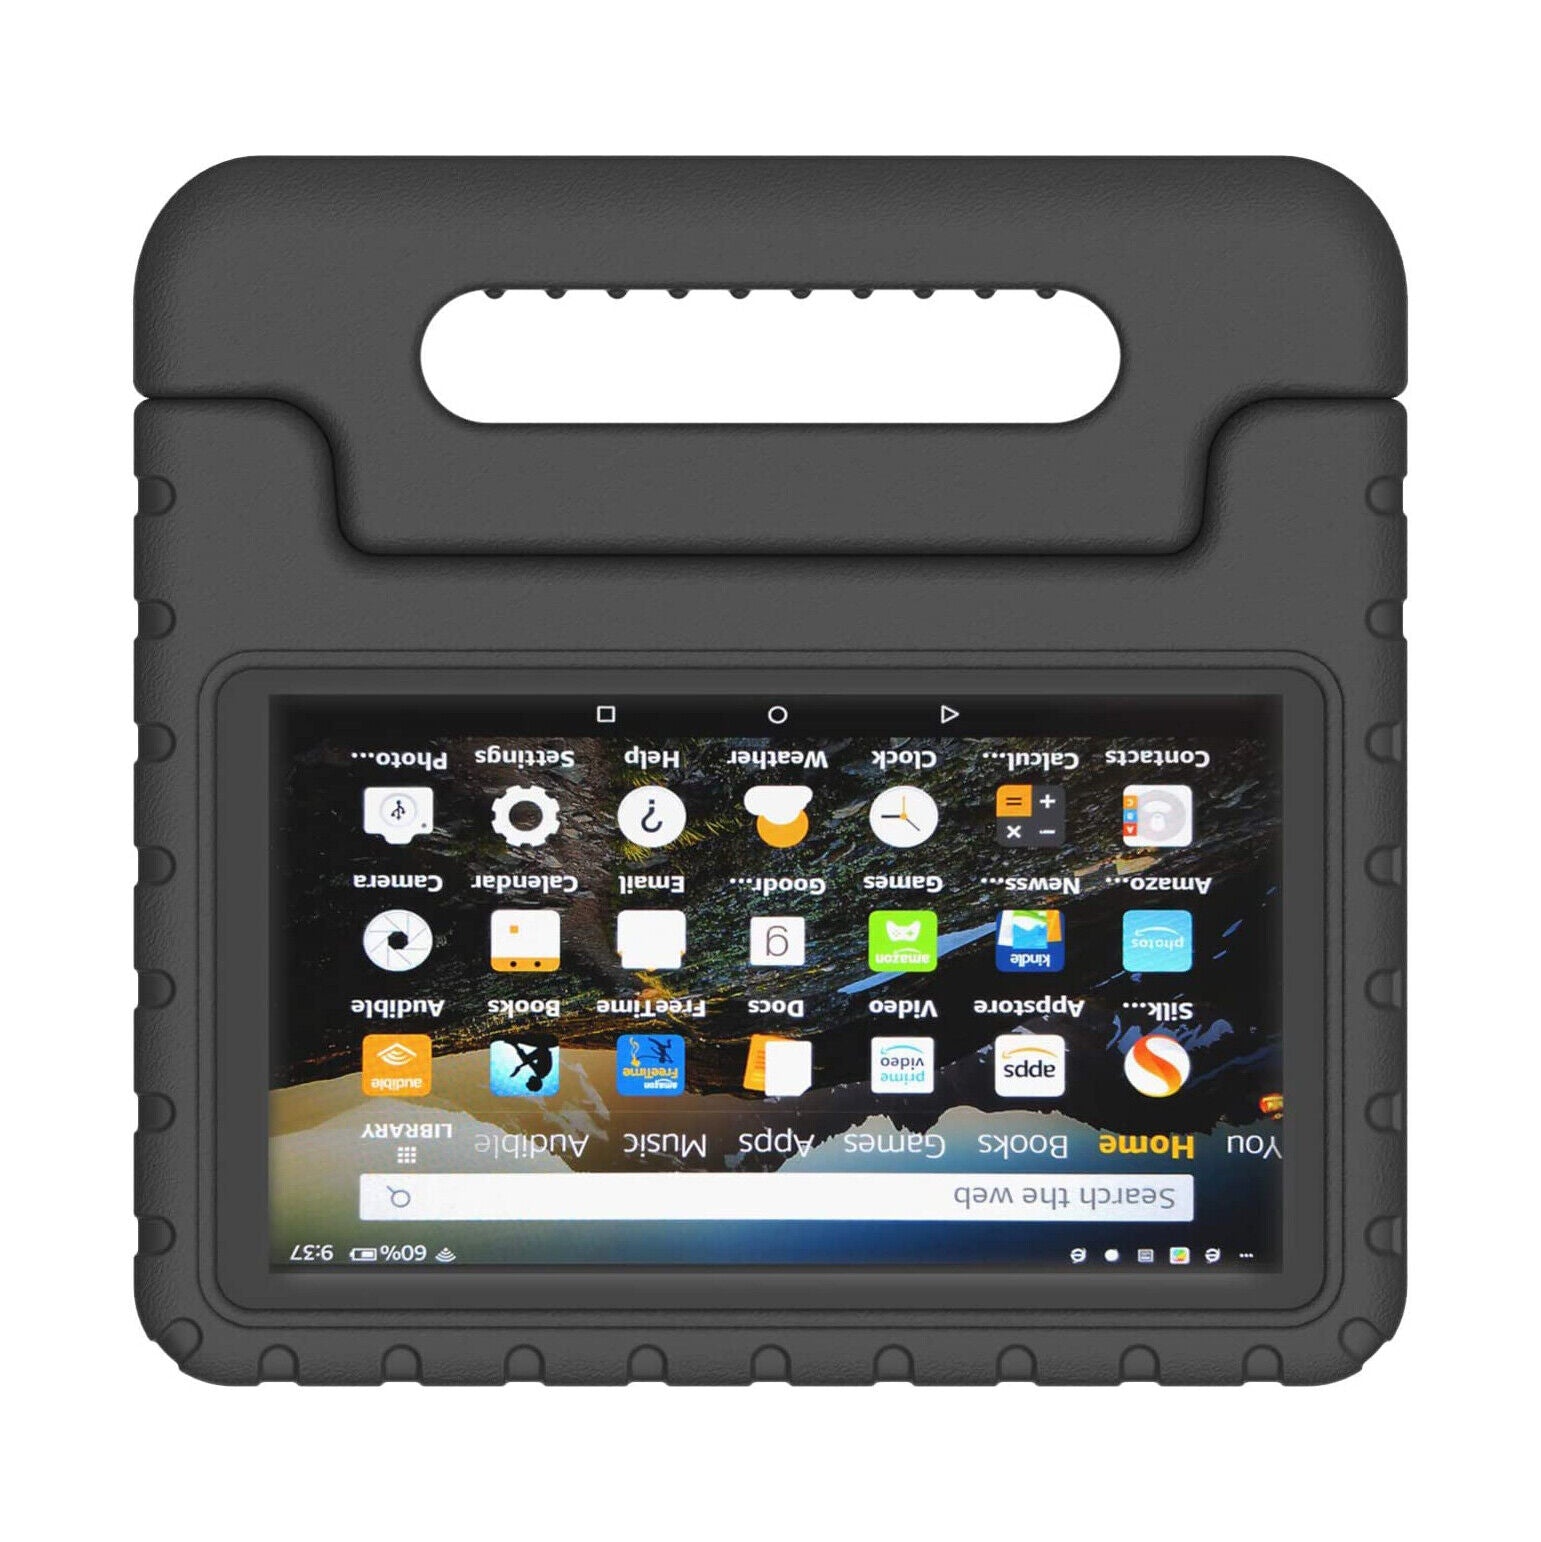 For Amazon Fire 7 2019 Kids Case Shockproof Cover With Stand - Black